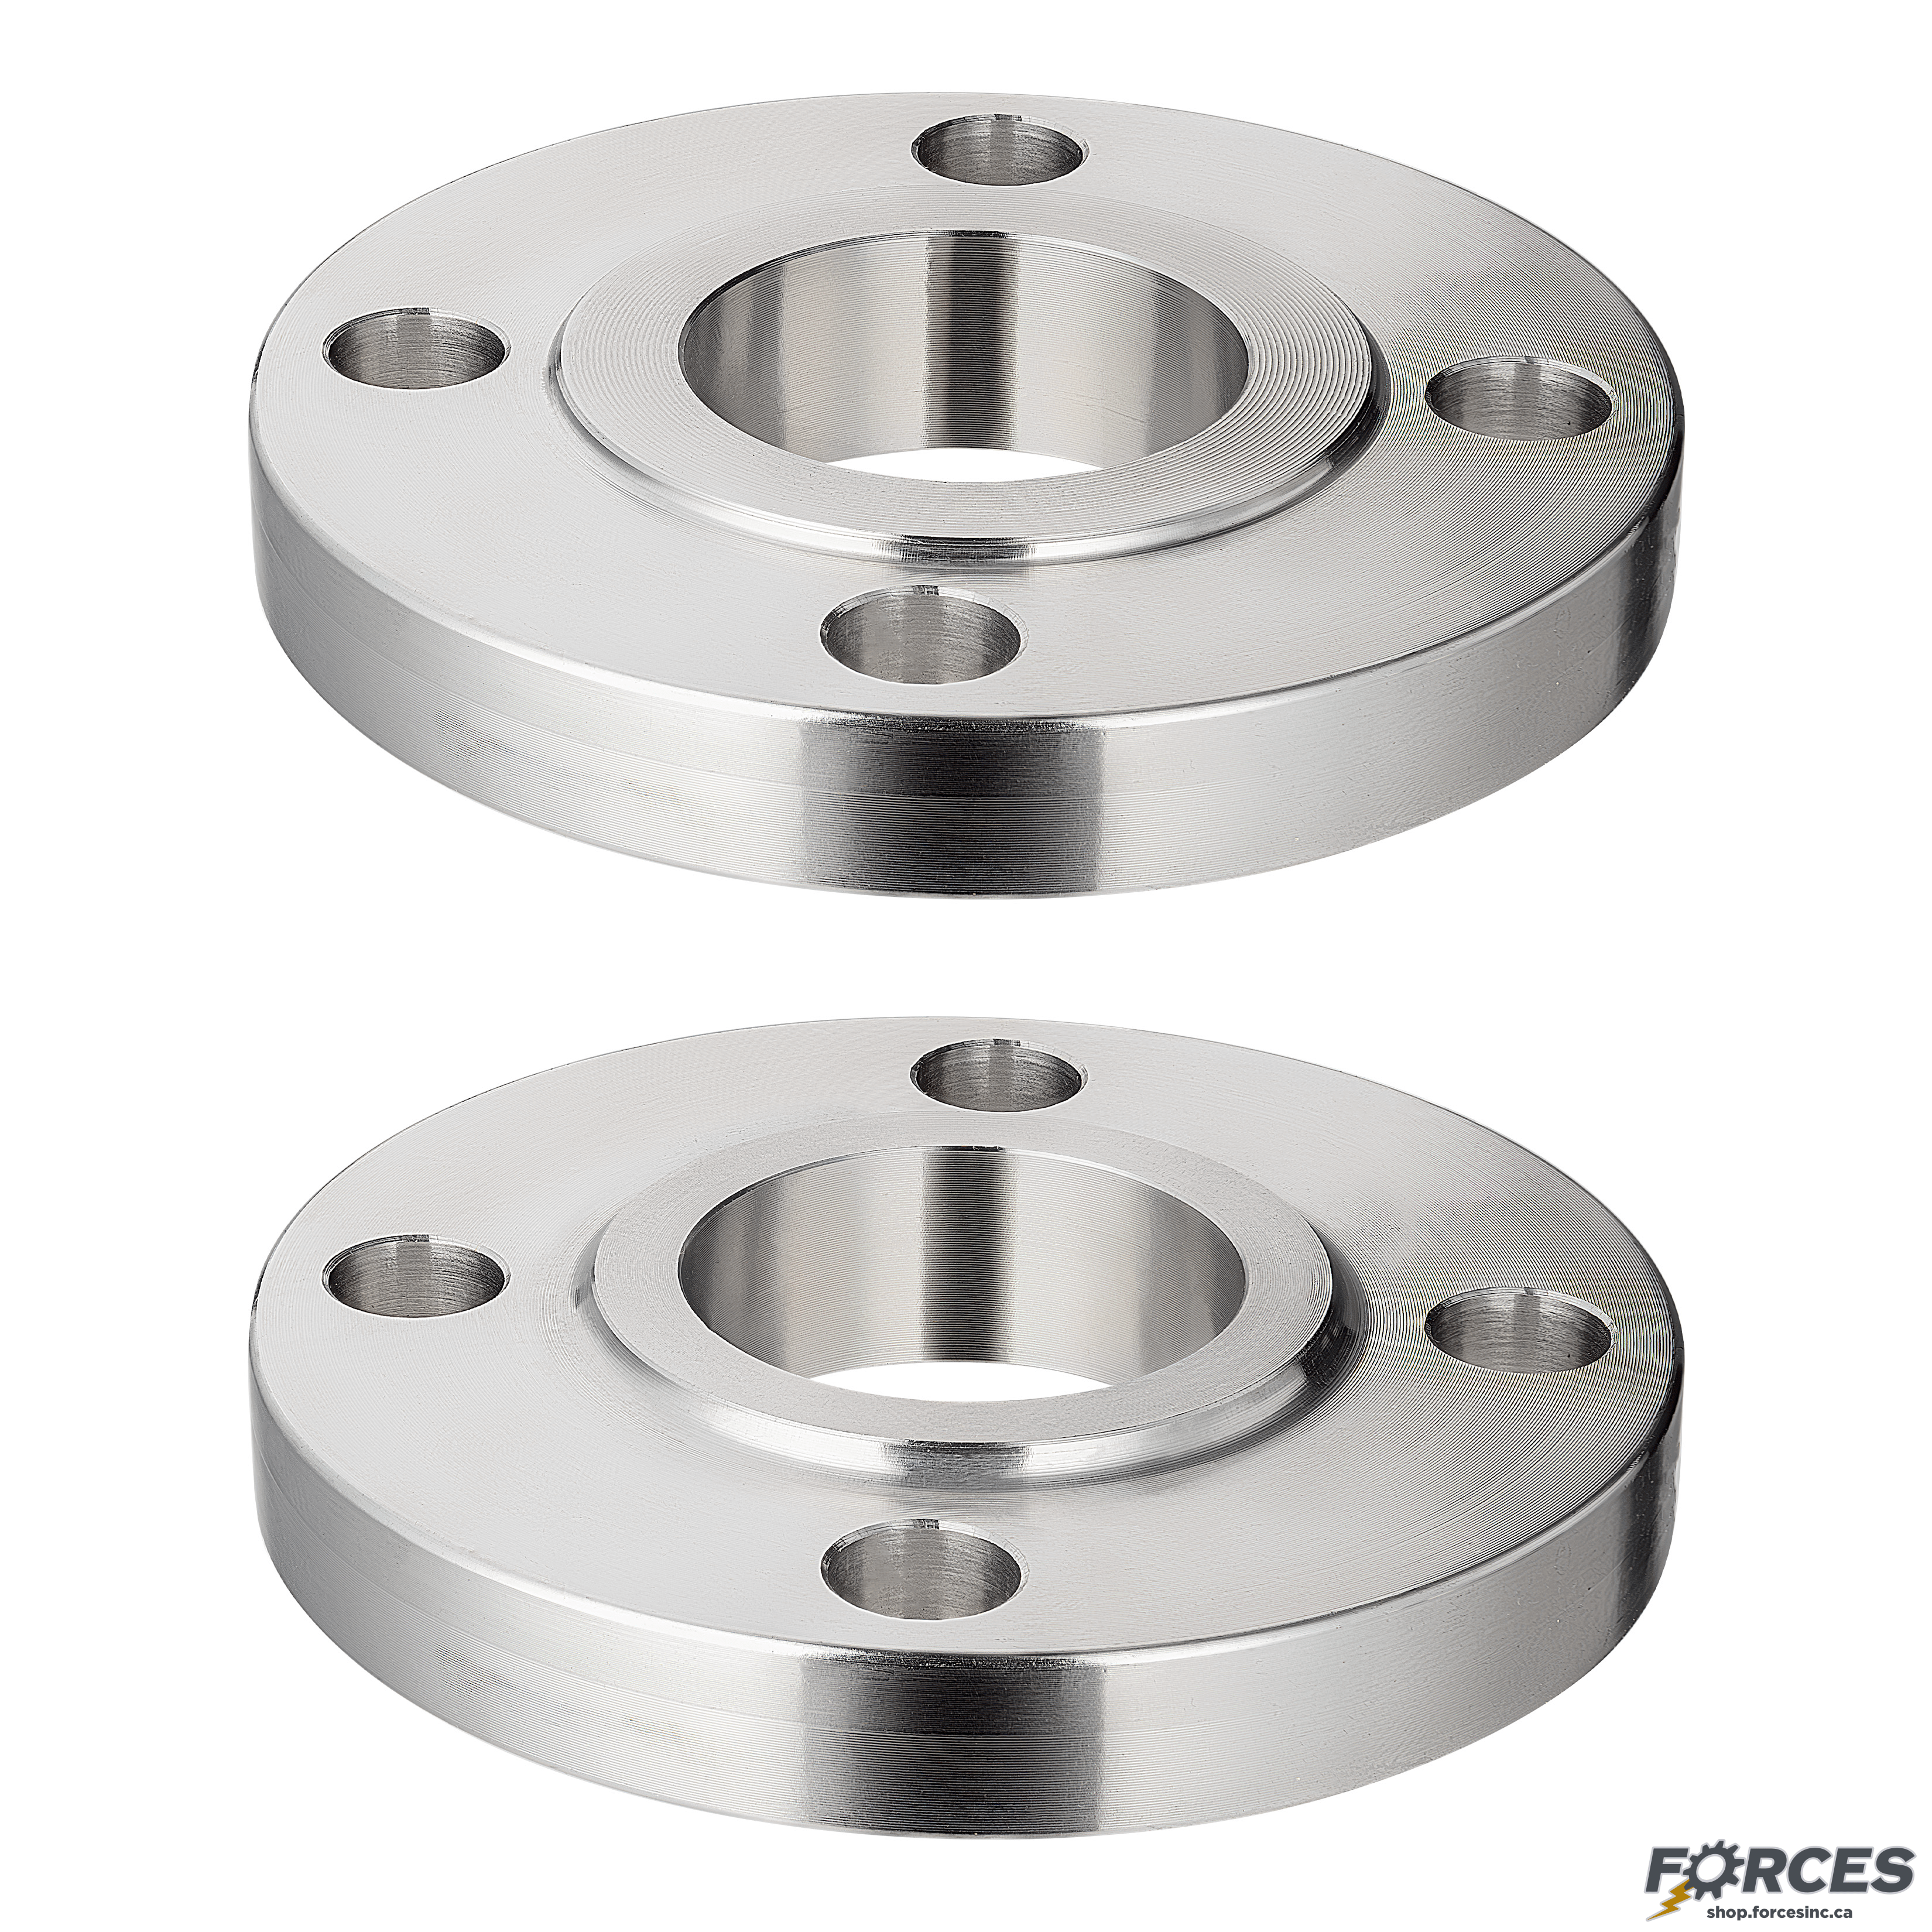 1-1/4" Slip-On Flange Class #150 - Stainless Steel 304 - Forces Inc